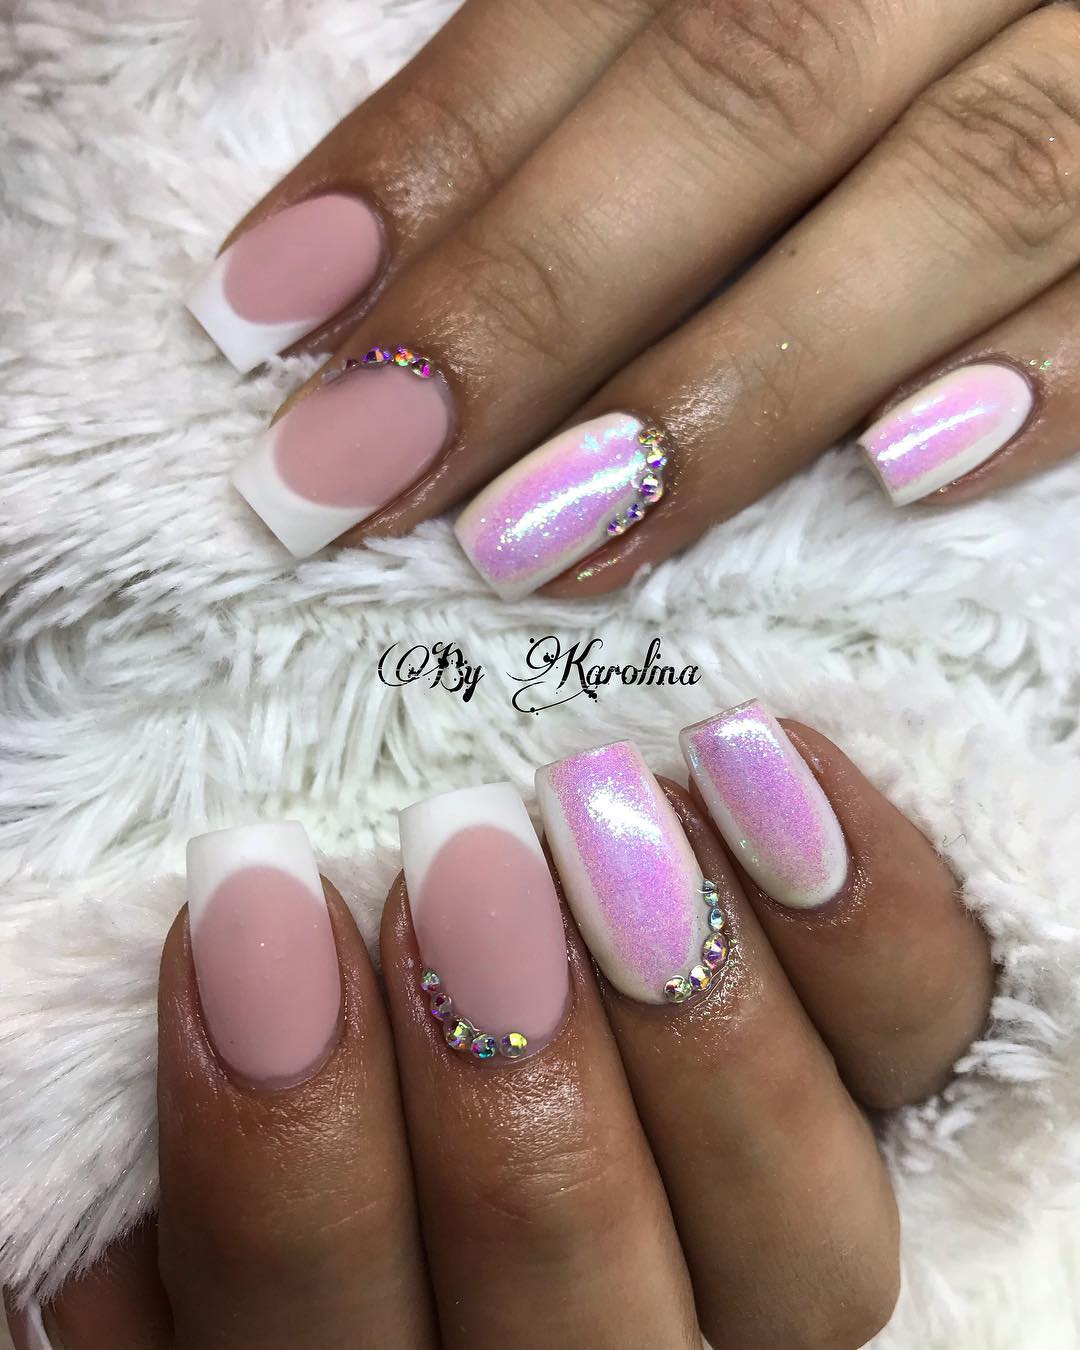 60 Trendy Square Nail Art Designs and Colors